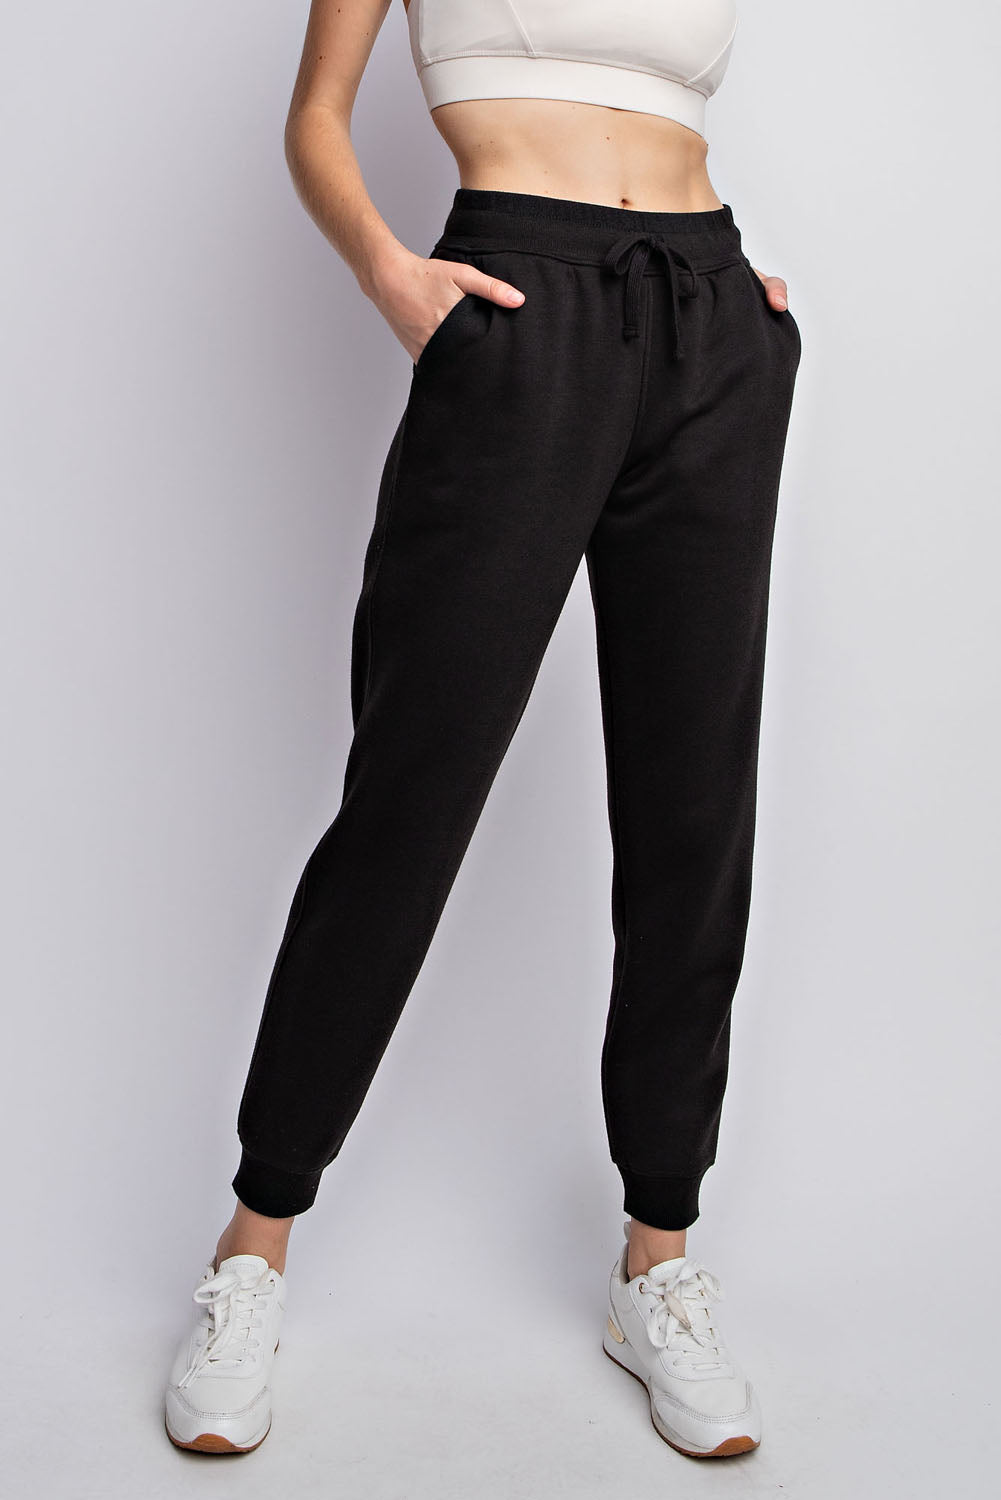  Wright's Women's French Terry Sweatpants, Black, Small